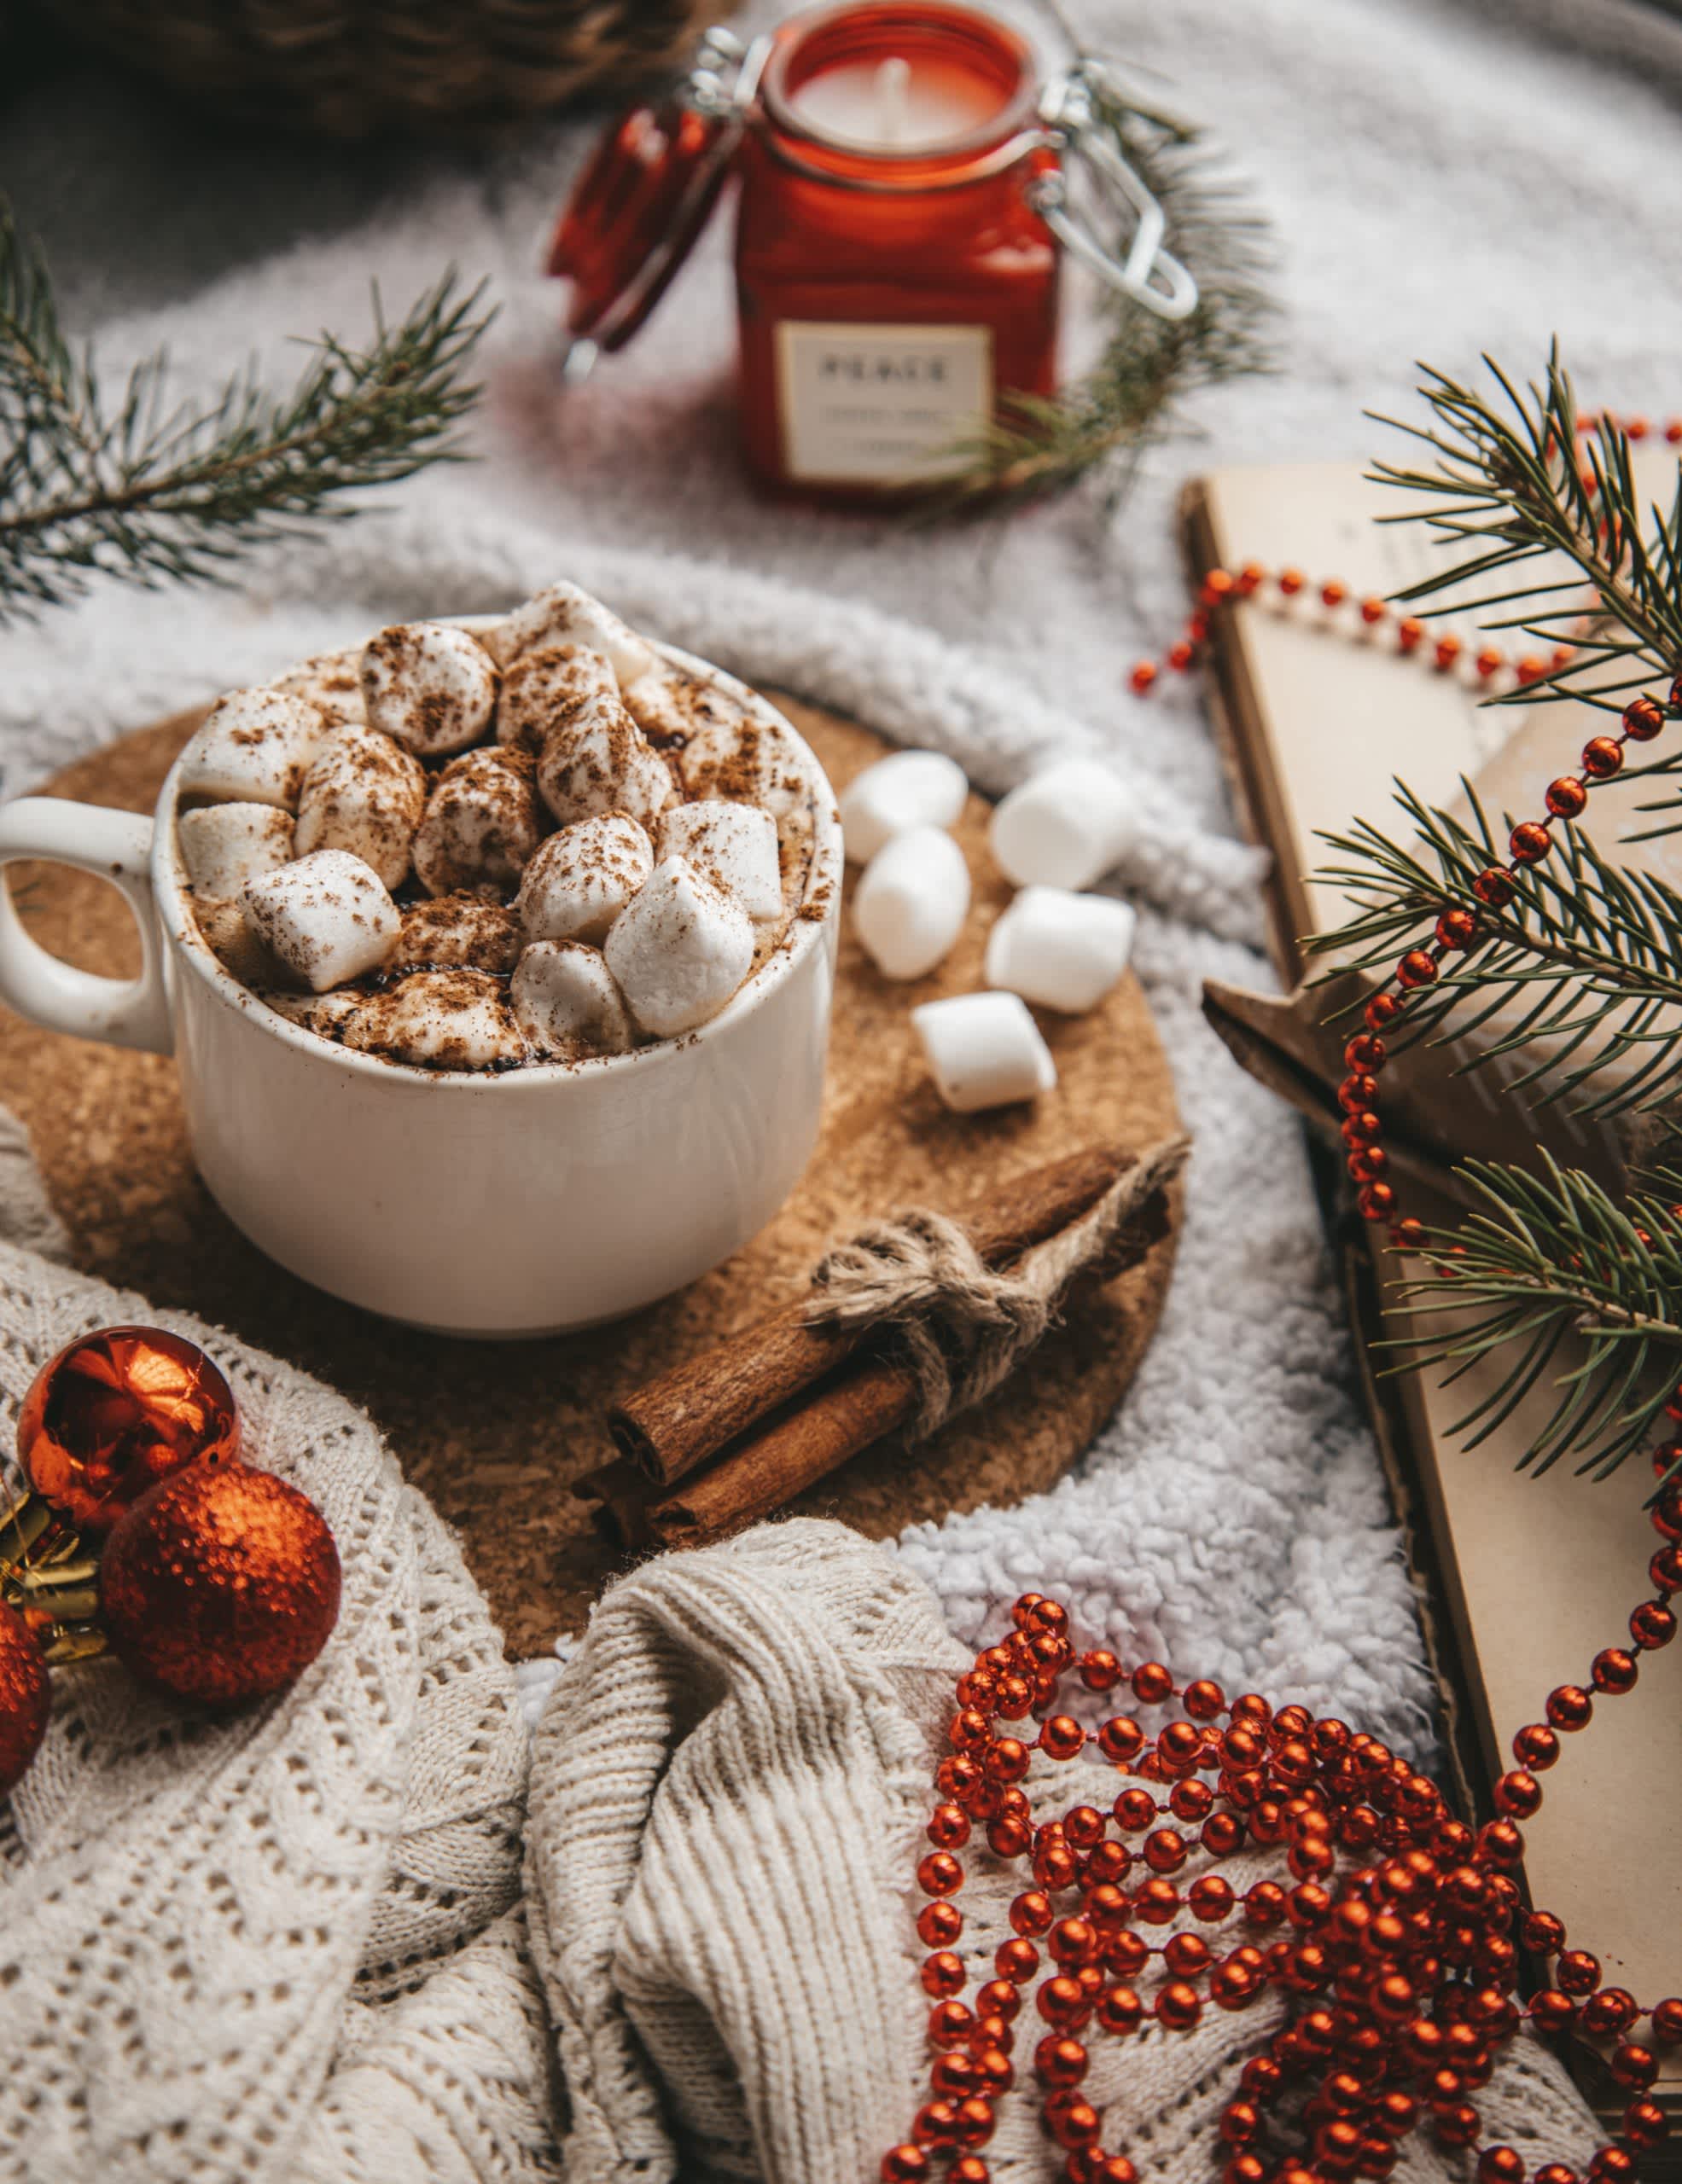 A festive Christmas spread of hot cocoa and marshmallows